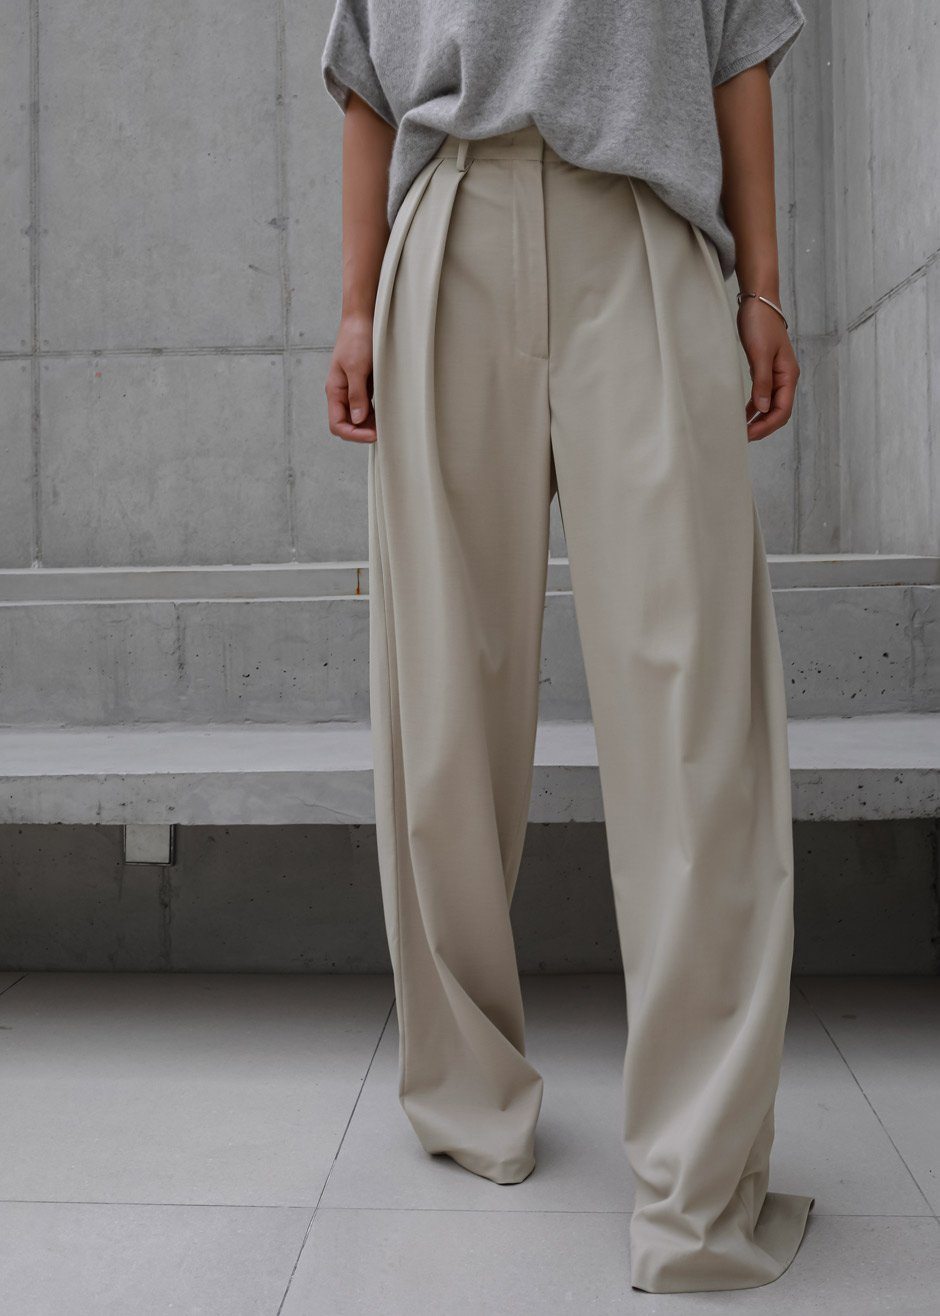 Go-To Pleated Pants